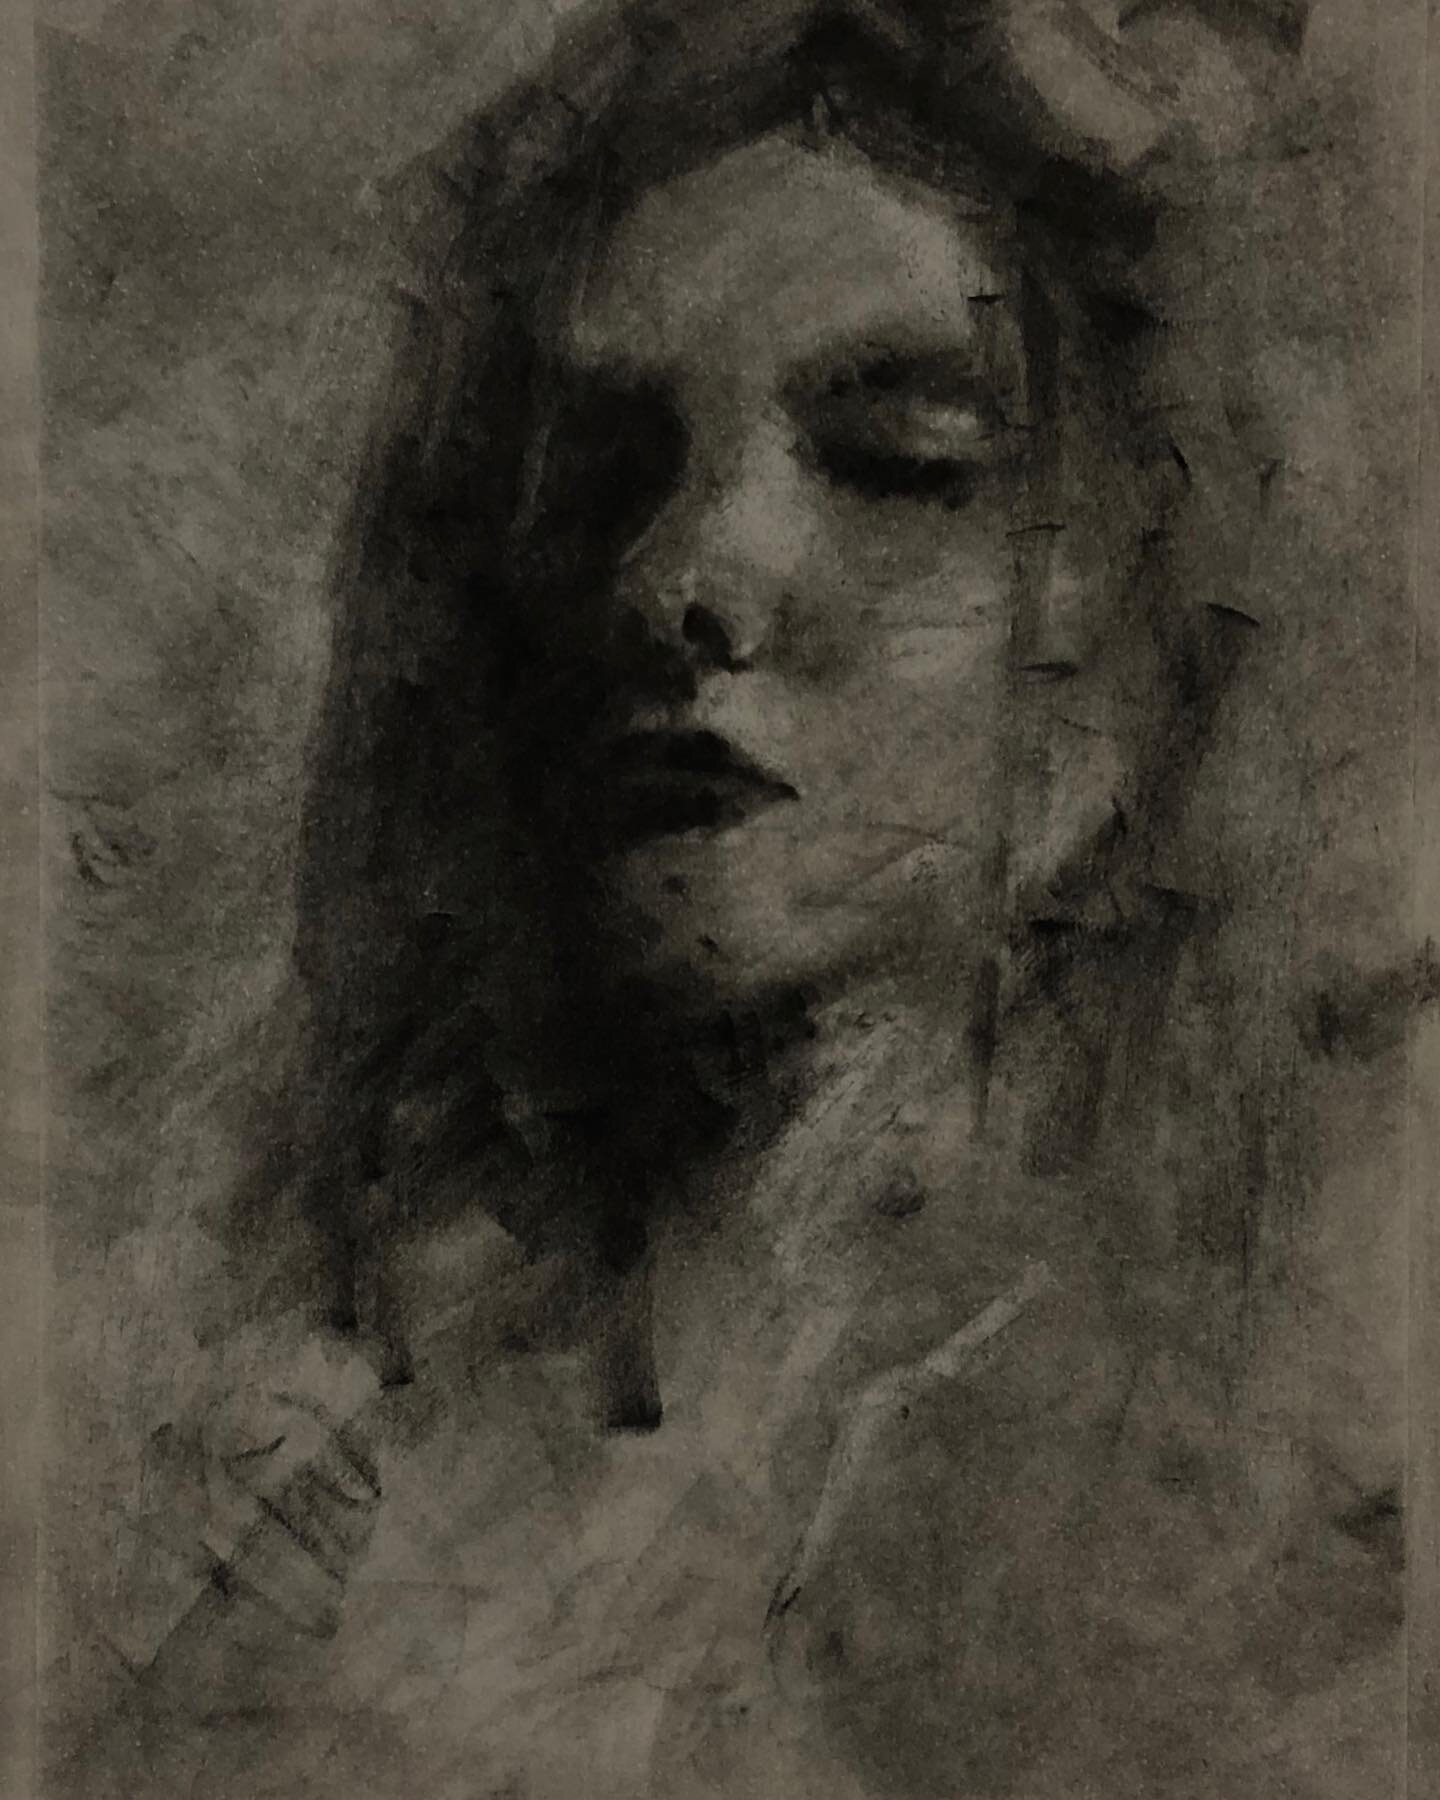 Quietly and to herself...
.
#art #artwork #artist #charcoal #portrait #charcoaldrawing #portraitdrawing #drawing #charcoalonpaper #sketch #figurativeartist #kc #kcmo #kansascity #kccrossroads #crossroadskc